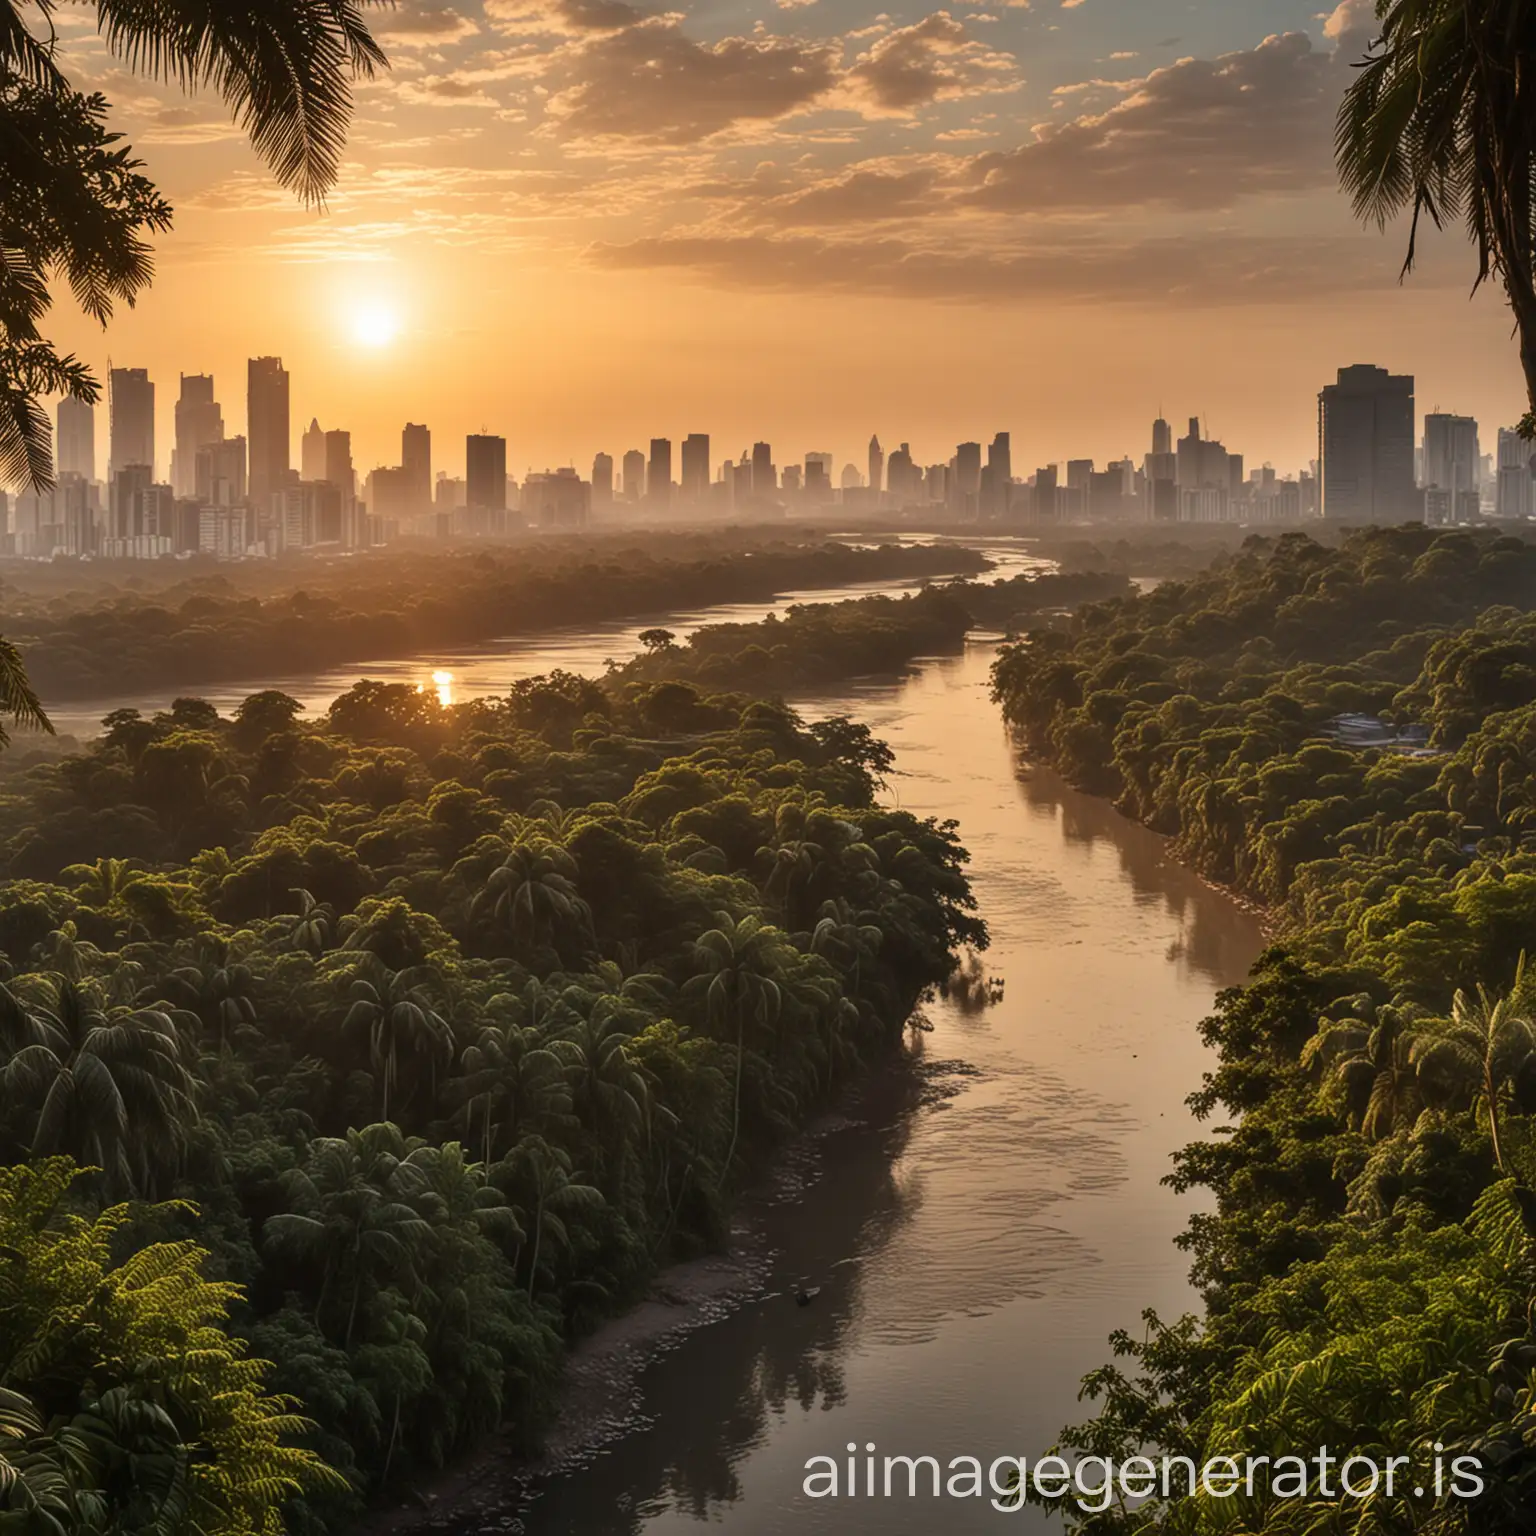 Jungle-Cityscape-at-Sunset-with-River-View